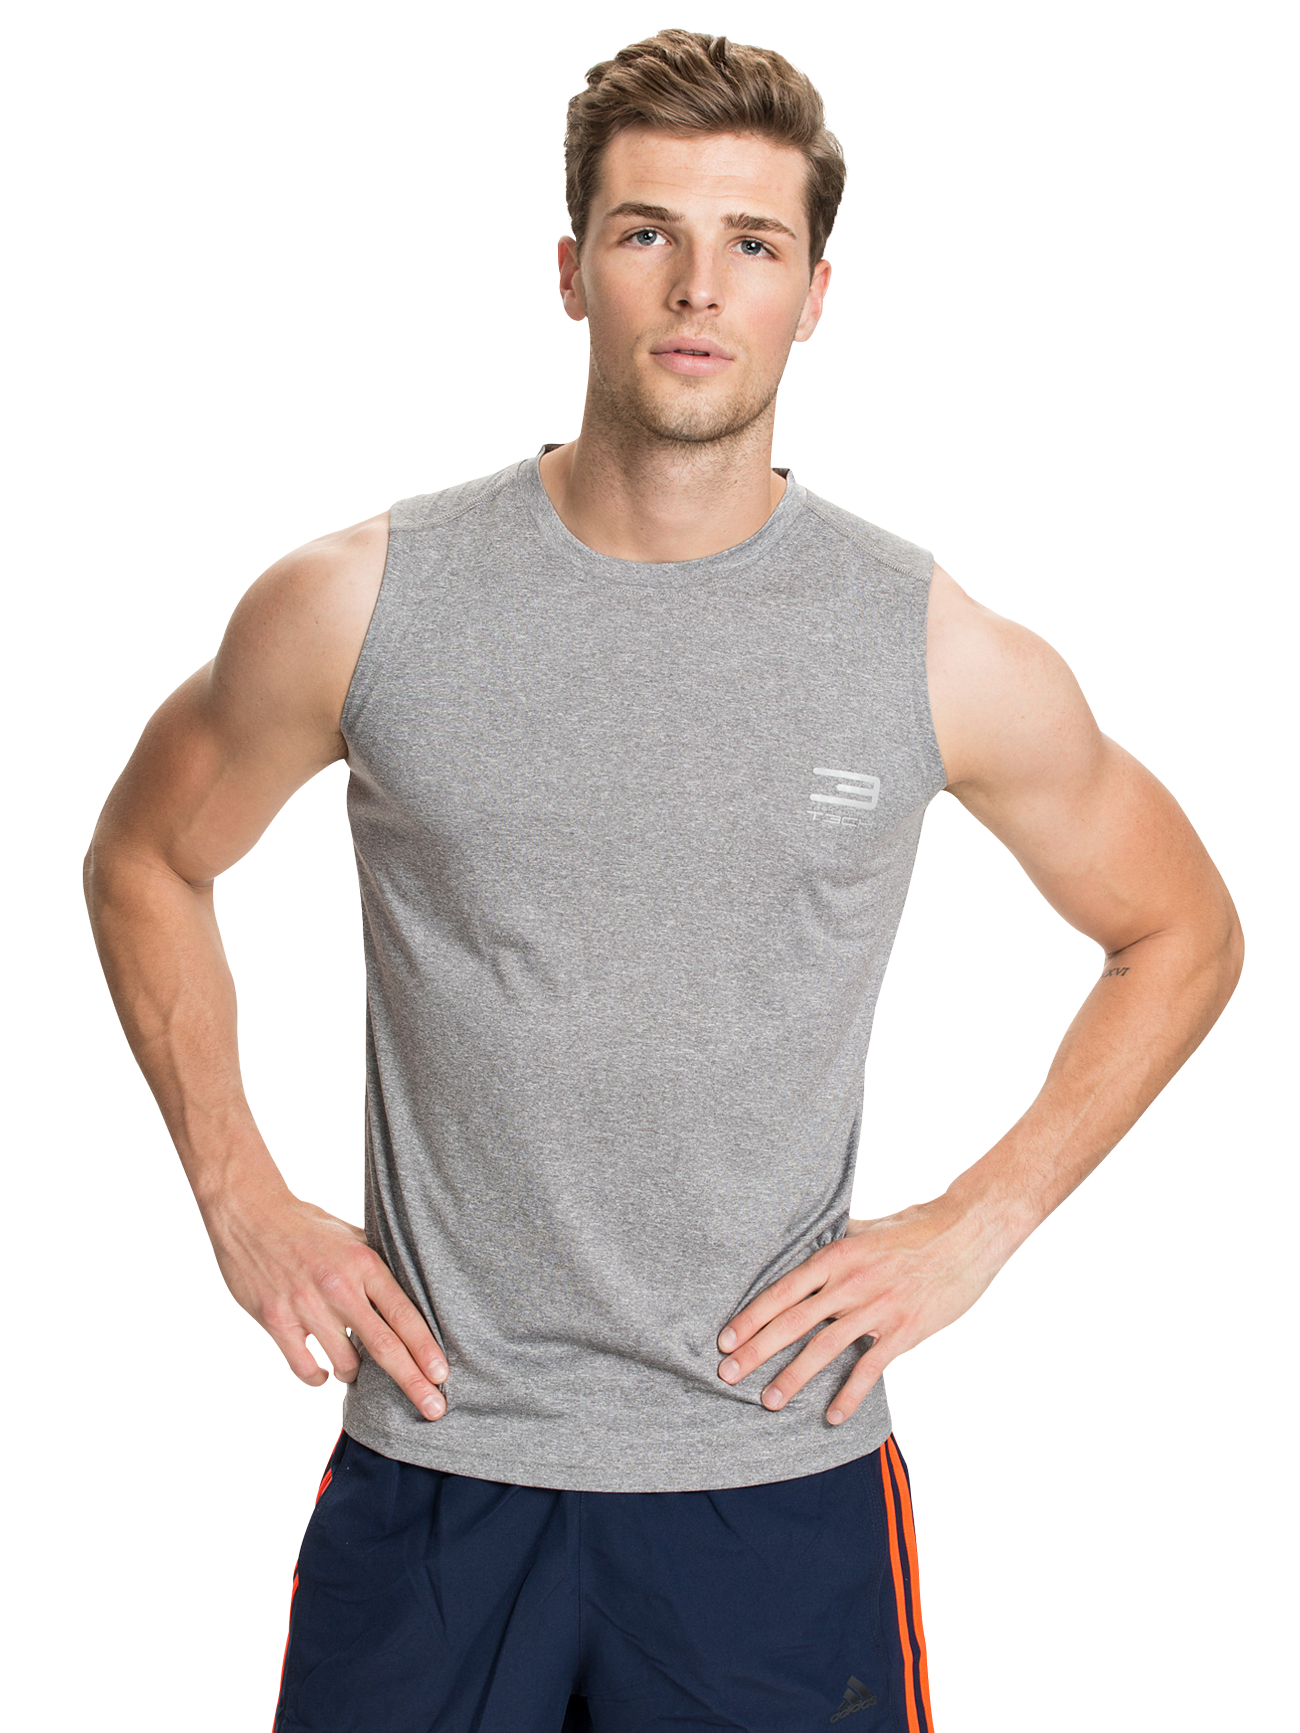 Skinny Man Fitness PNG Free Photo PNG Image